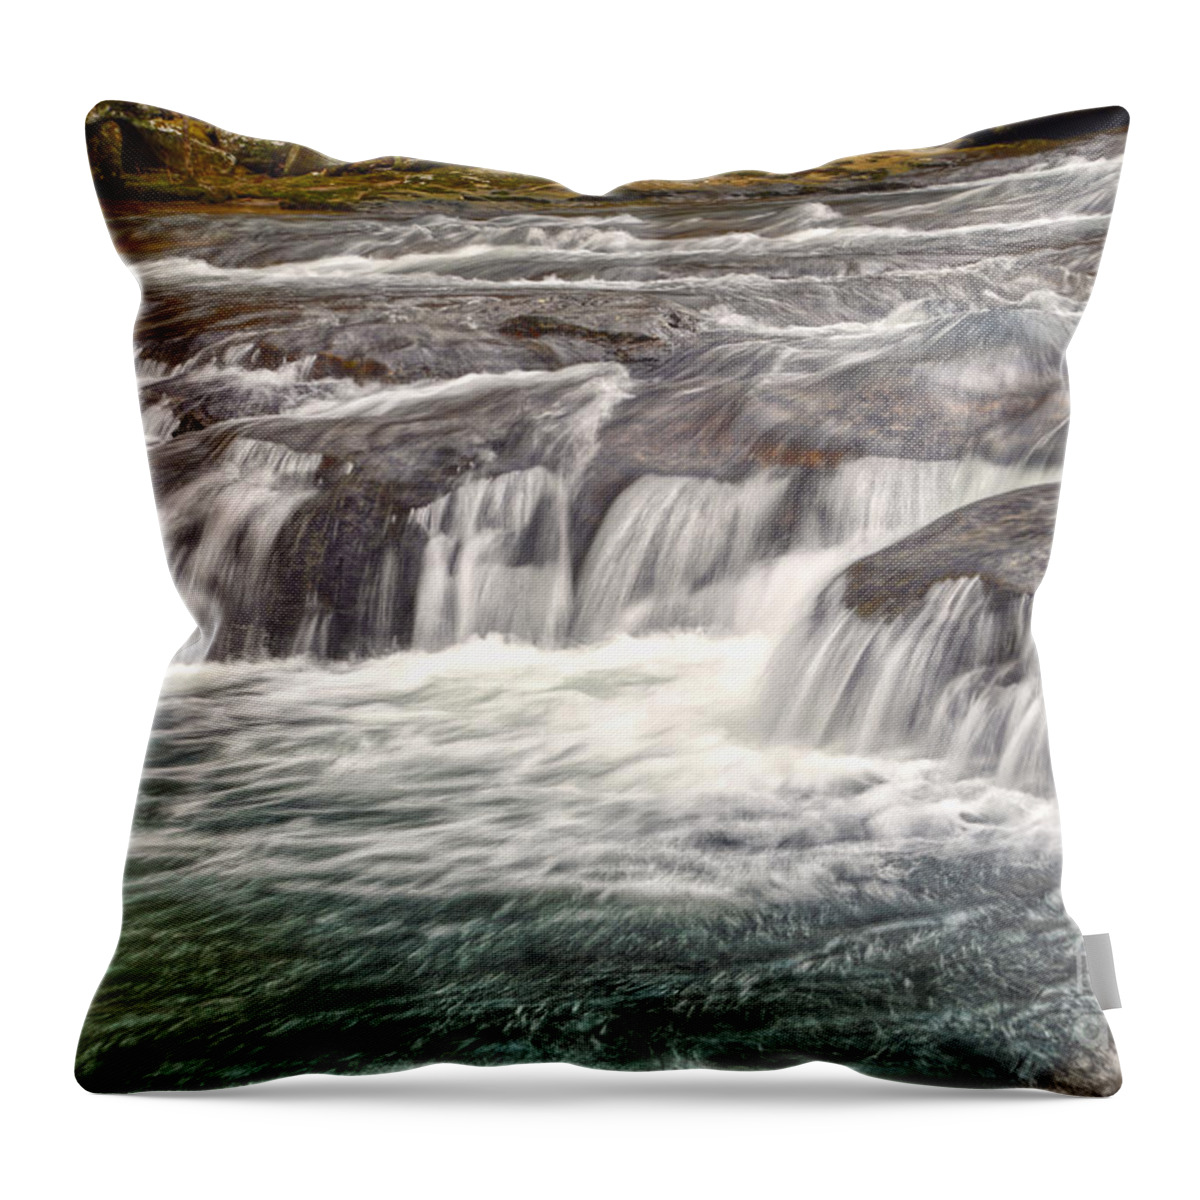 Landscape Throw Pillow featuring the photograph Richland Creek Rapids by Phil Perkins